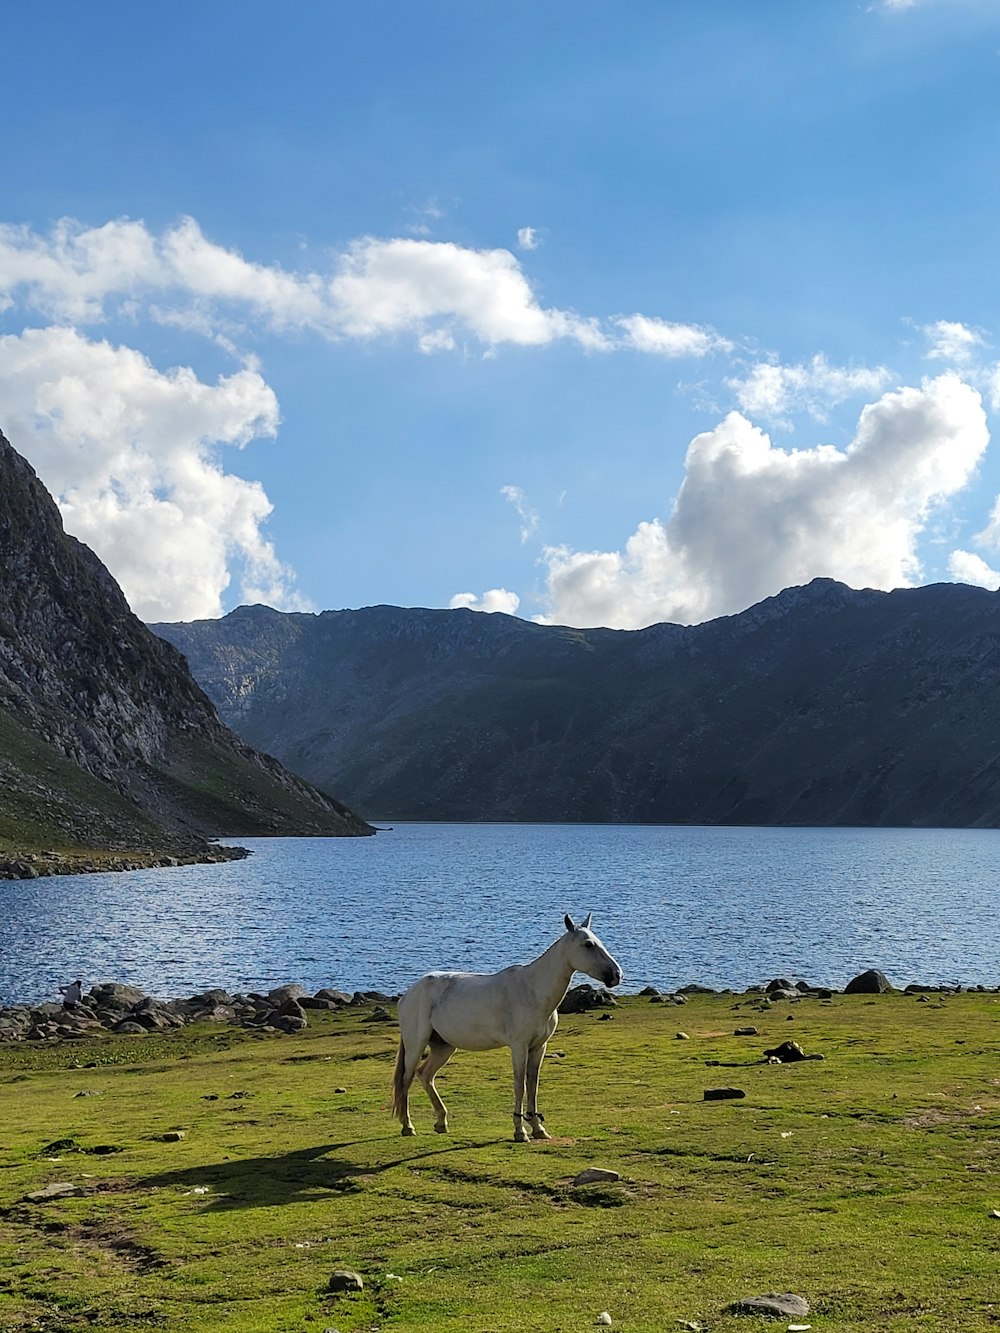 a horse standing on a grassy hill by a body of water